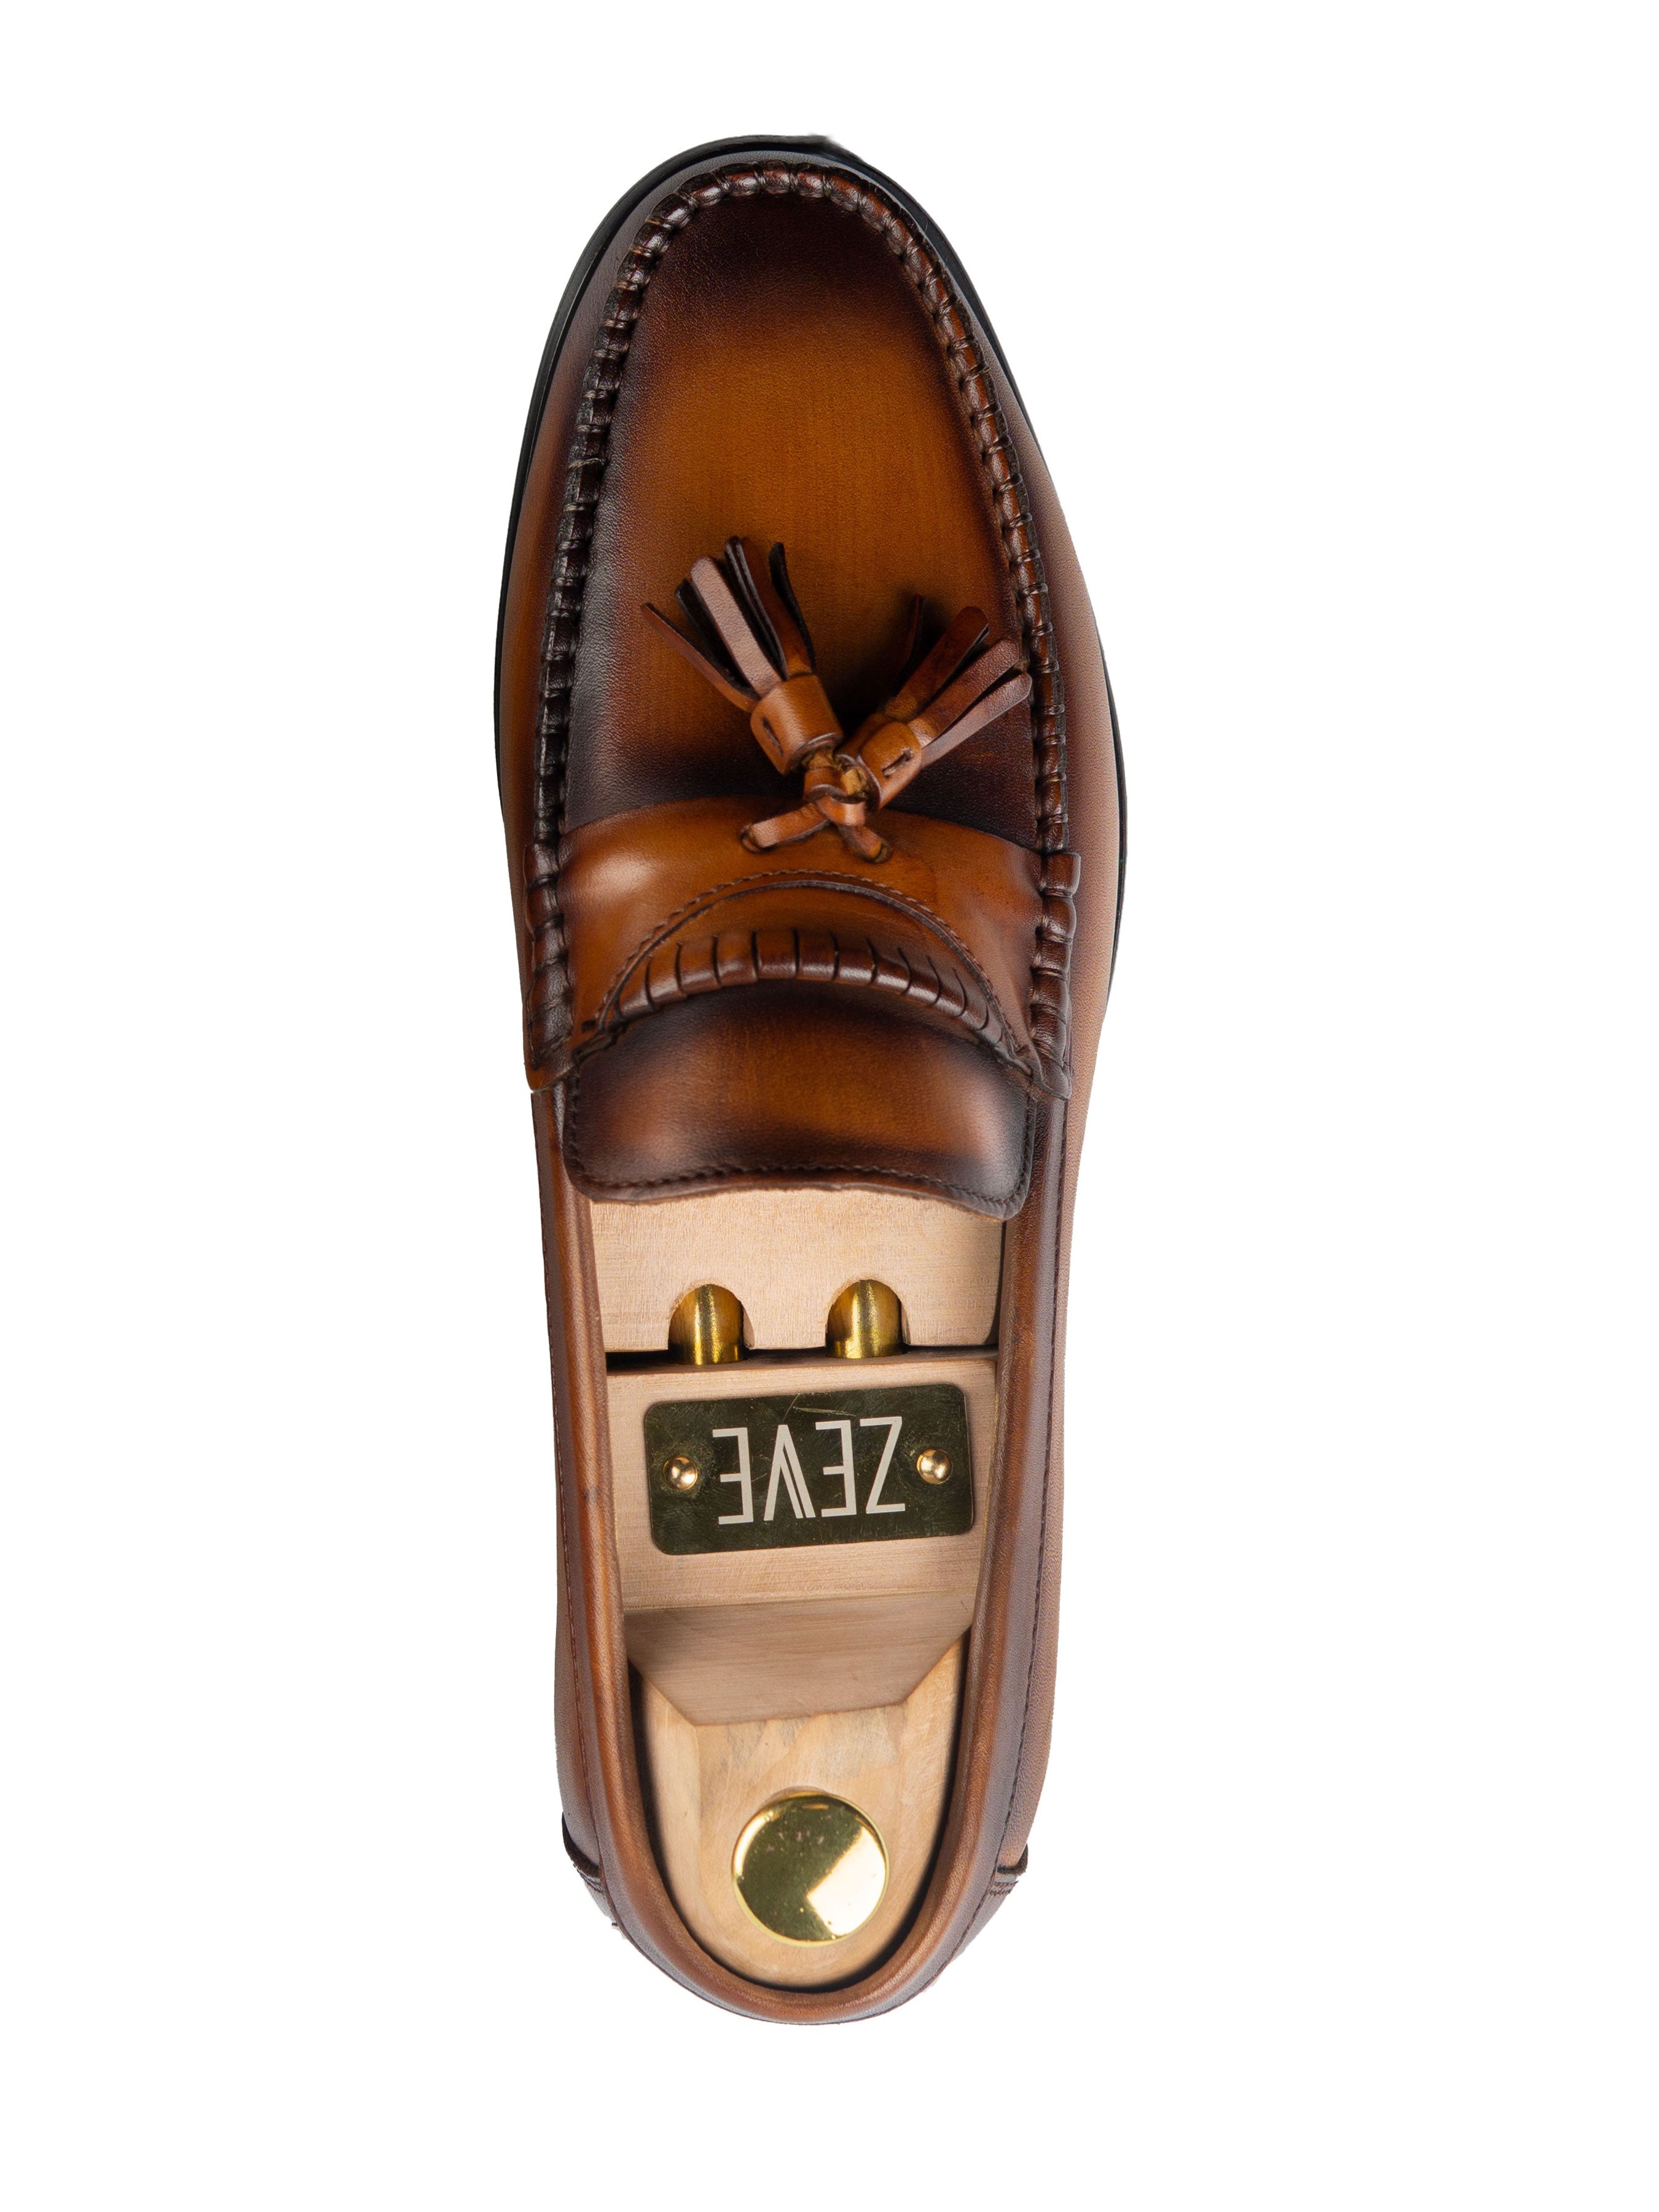 Tassel Moccasin Loafer - Cognac Tan (Hand Painted Patina) - Zeve Shoes